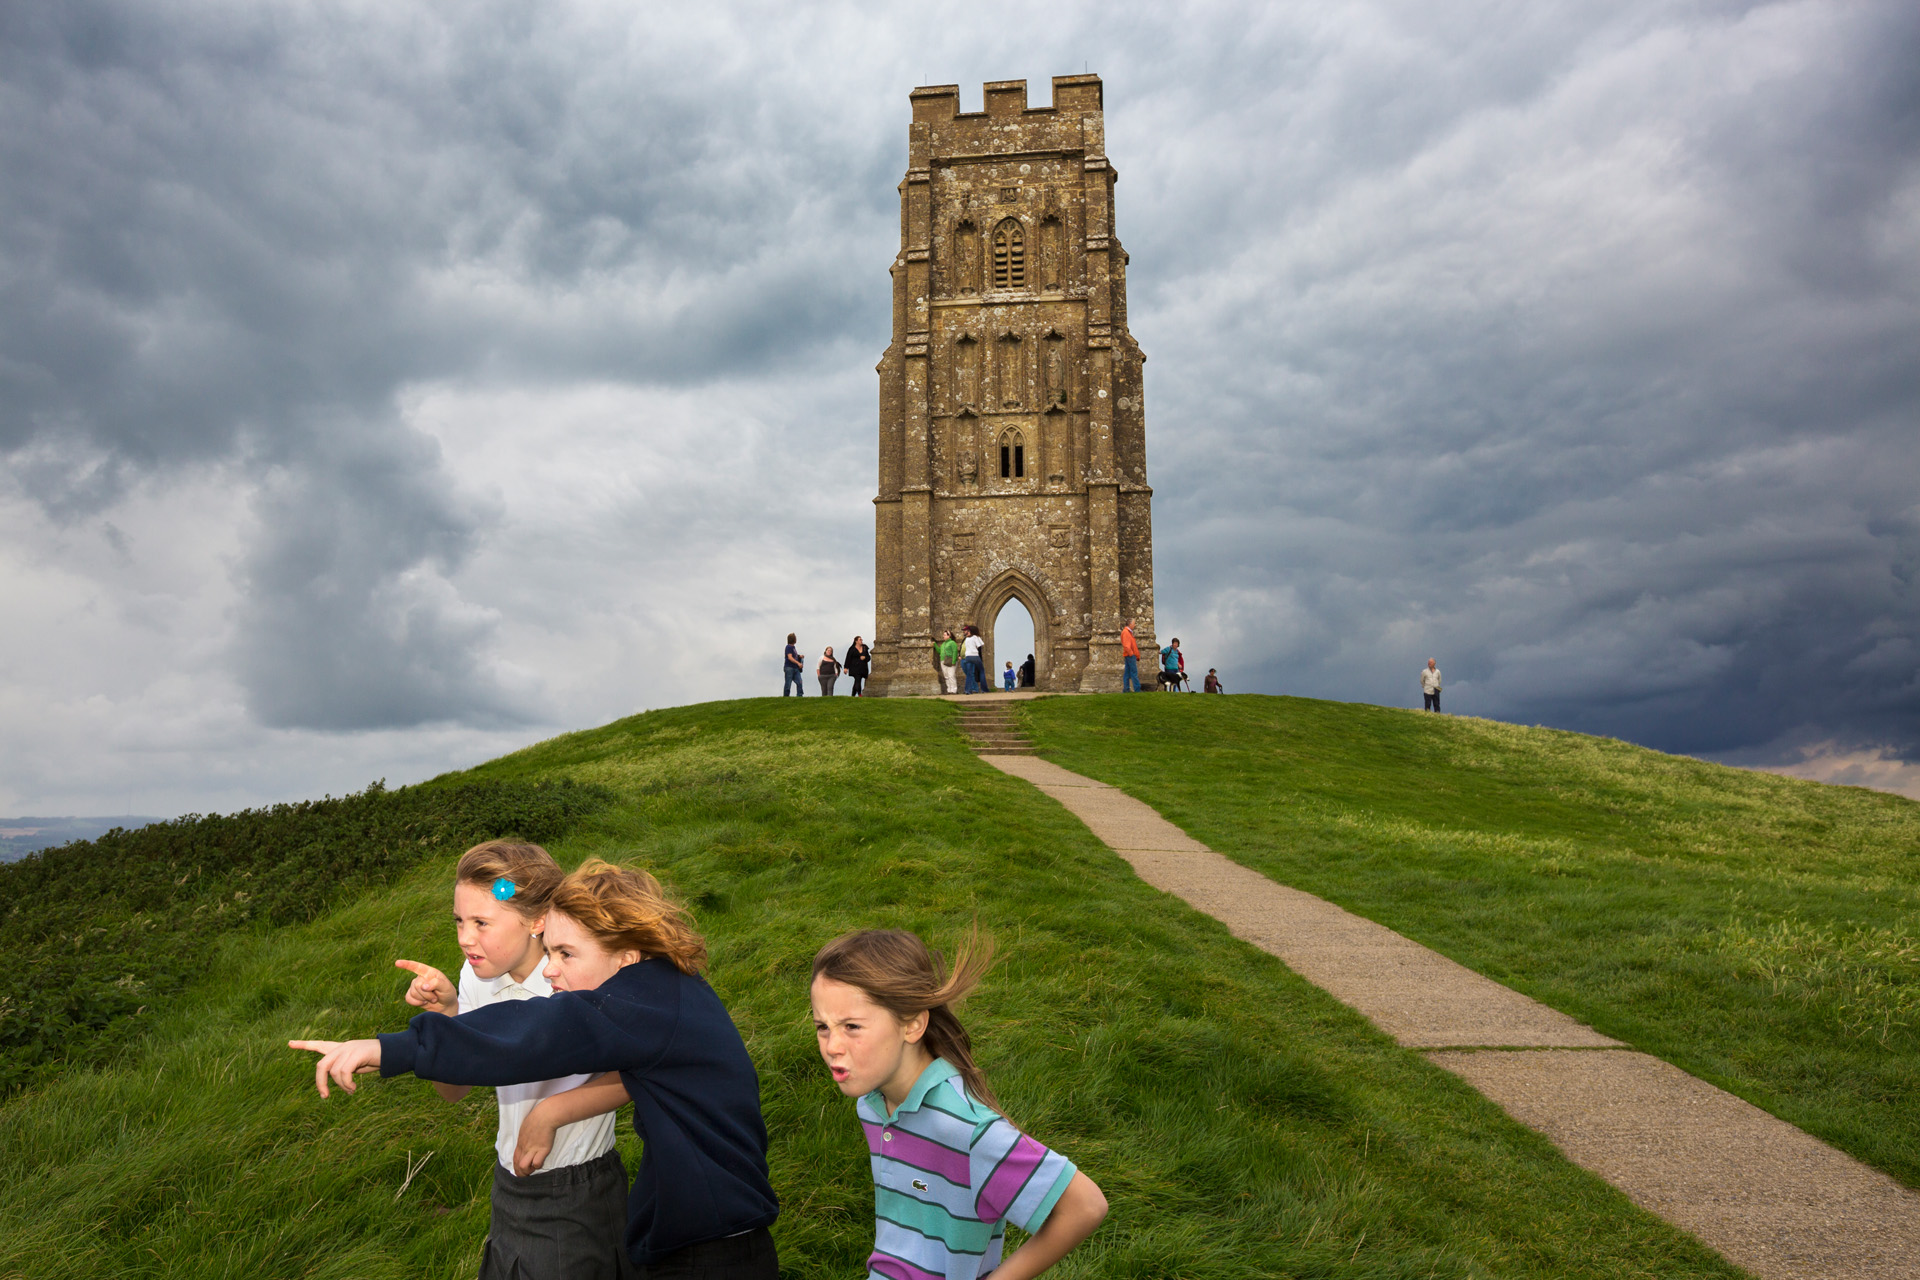  Only the spire of medieval St. Michael’s church remains on Glastonbury Tor, the entrance to Avalon – a mythical place where the legendary king awaits his return into this world. The Tor has been identified with King Arthur since the alleged discover